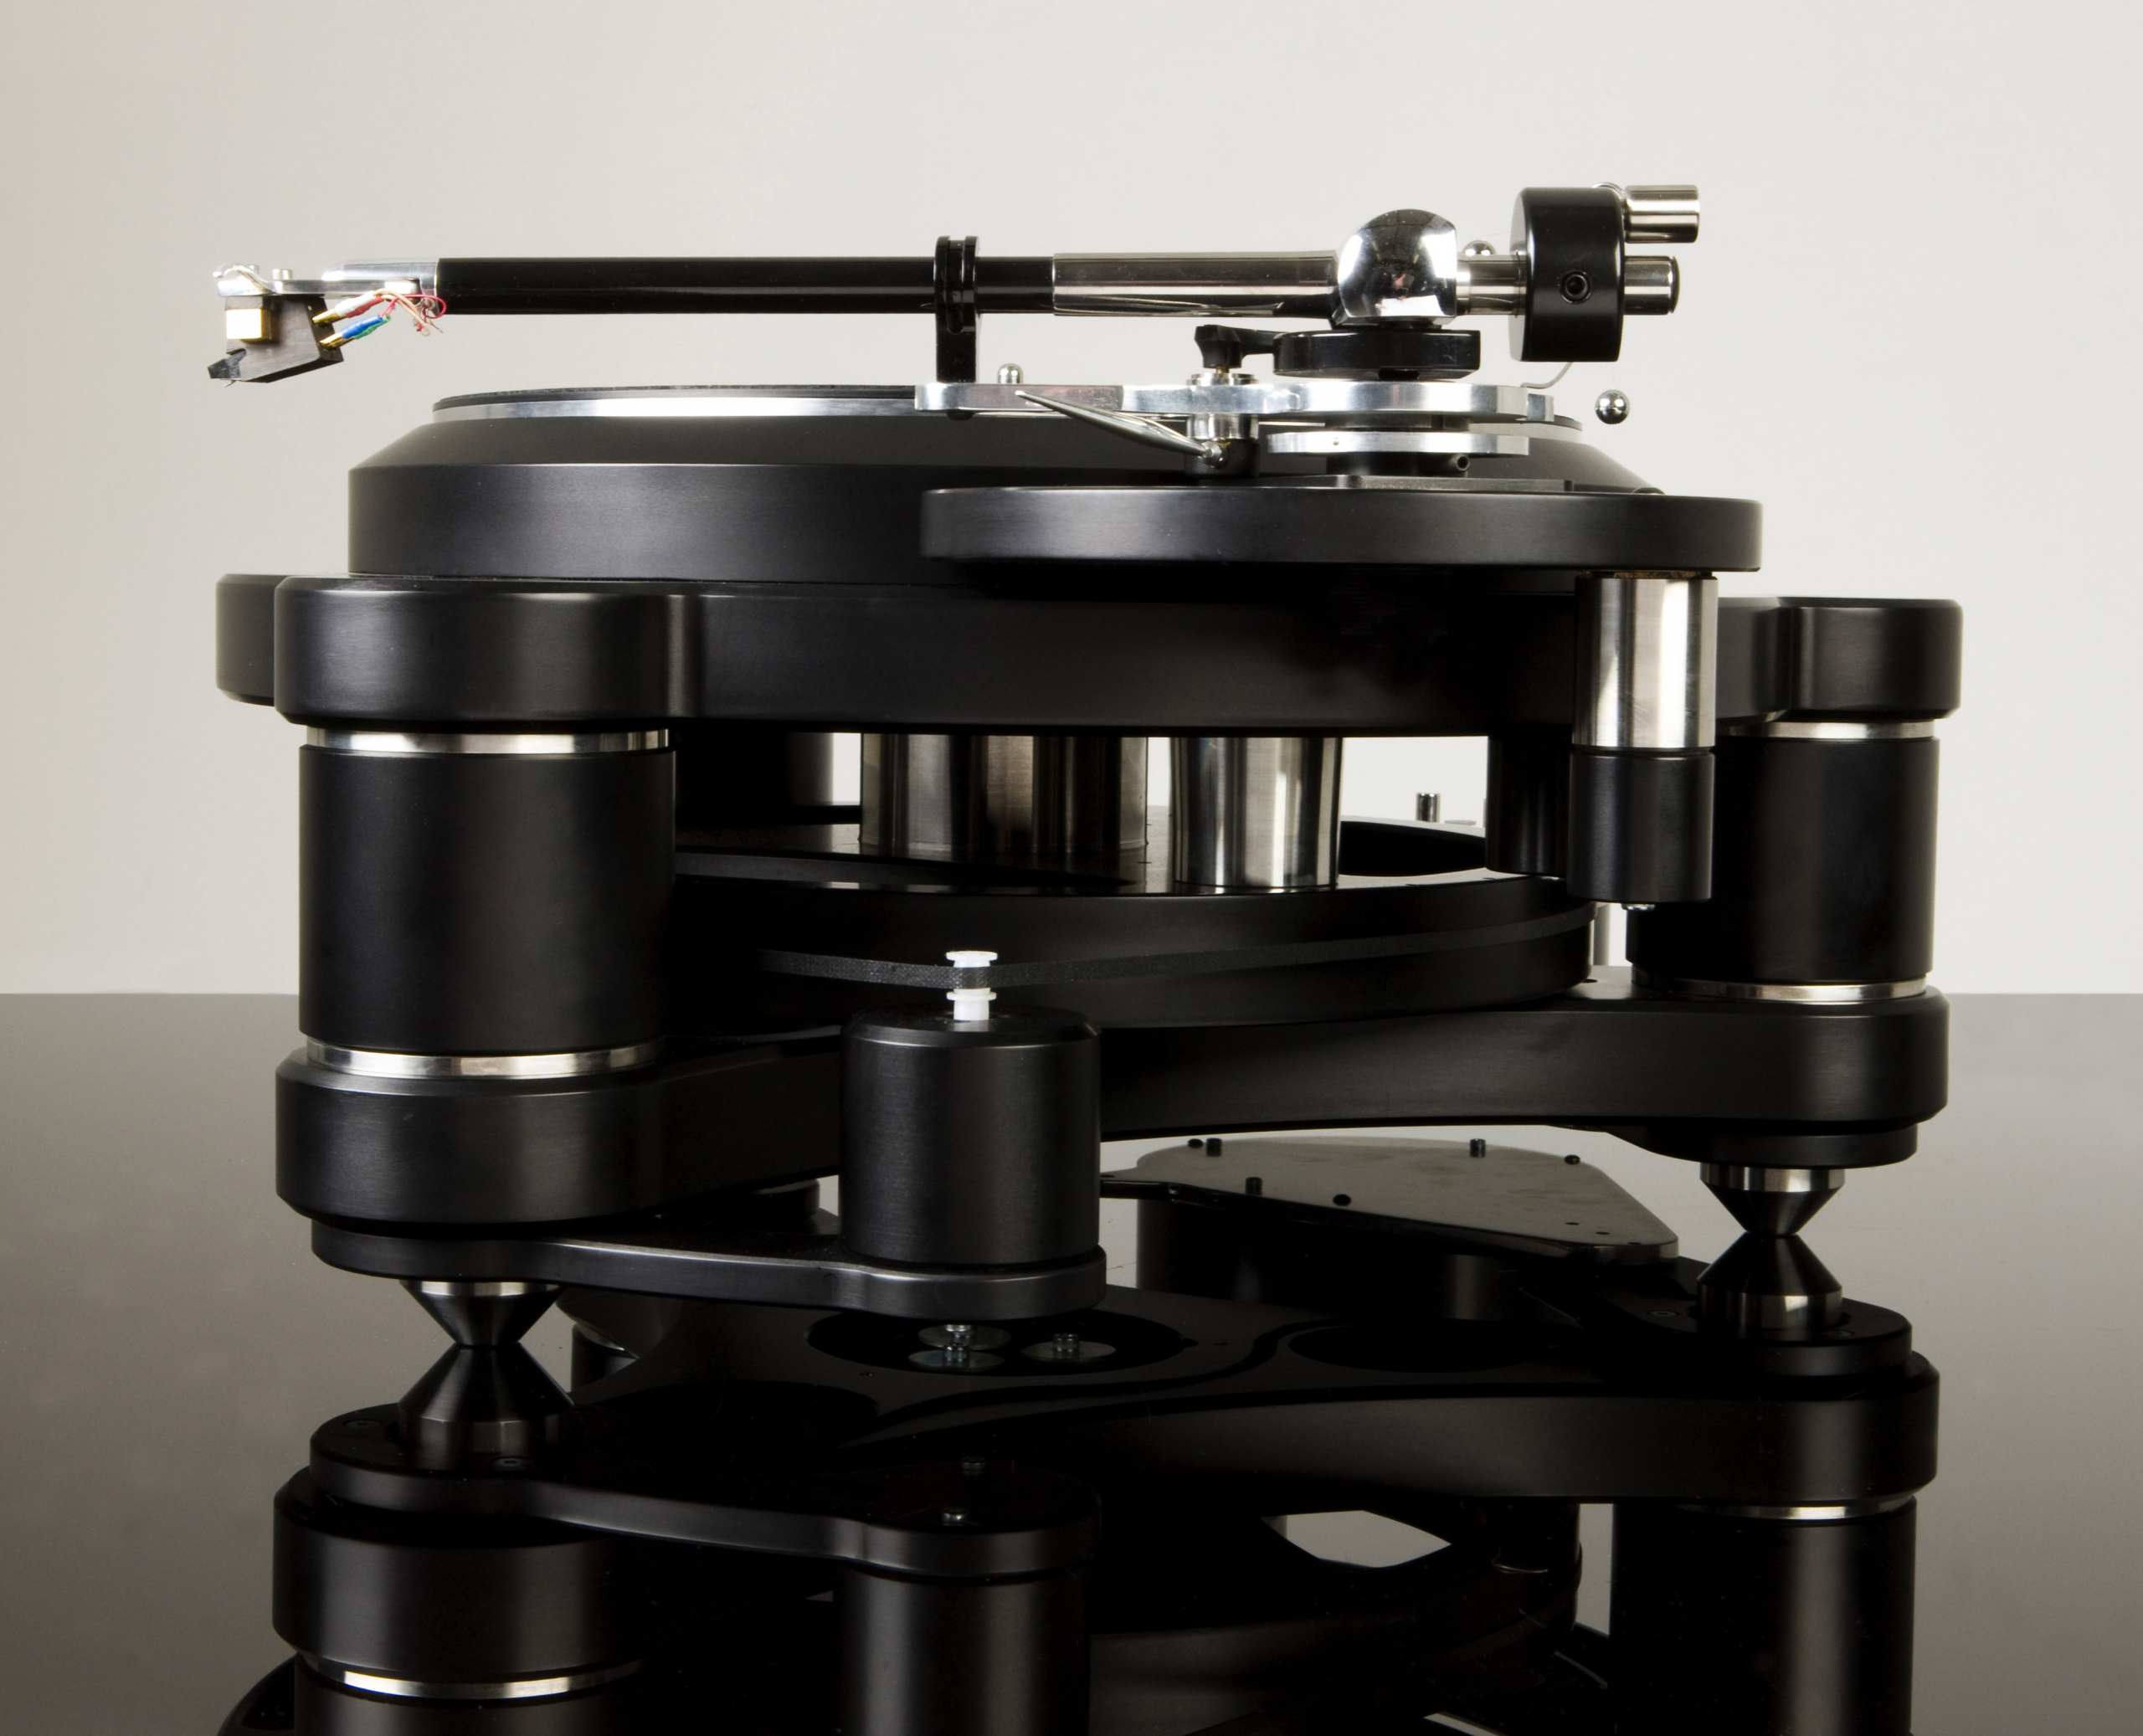 Ultimate turntable Voyager by Origin Live best Turtnable in the world